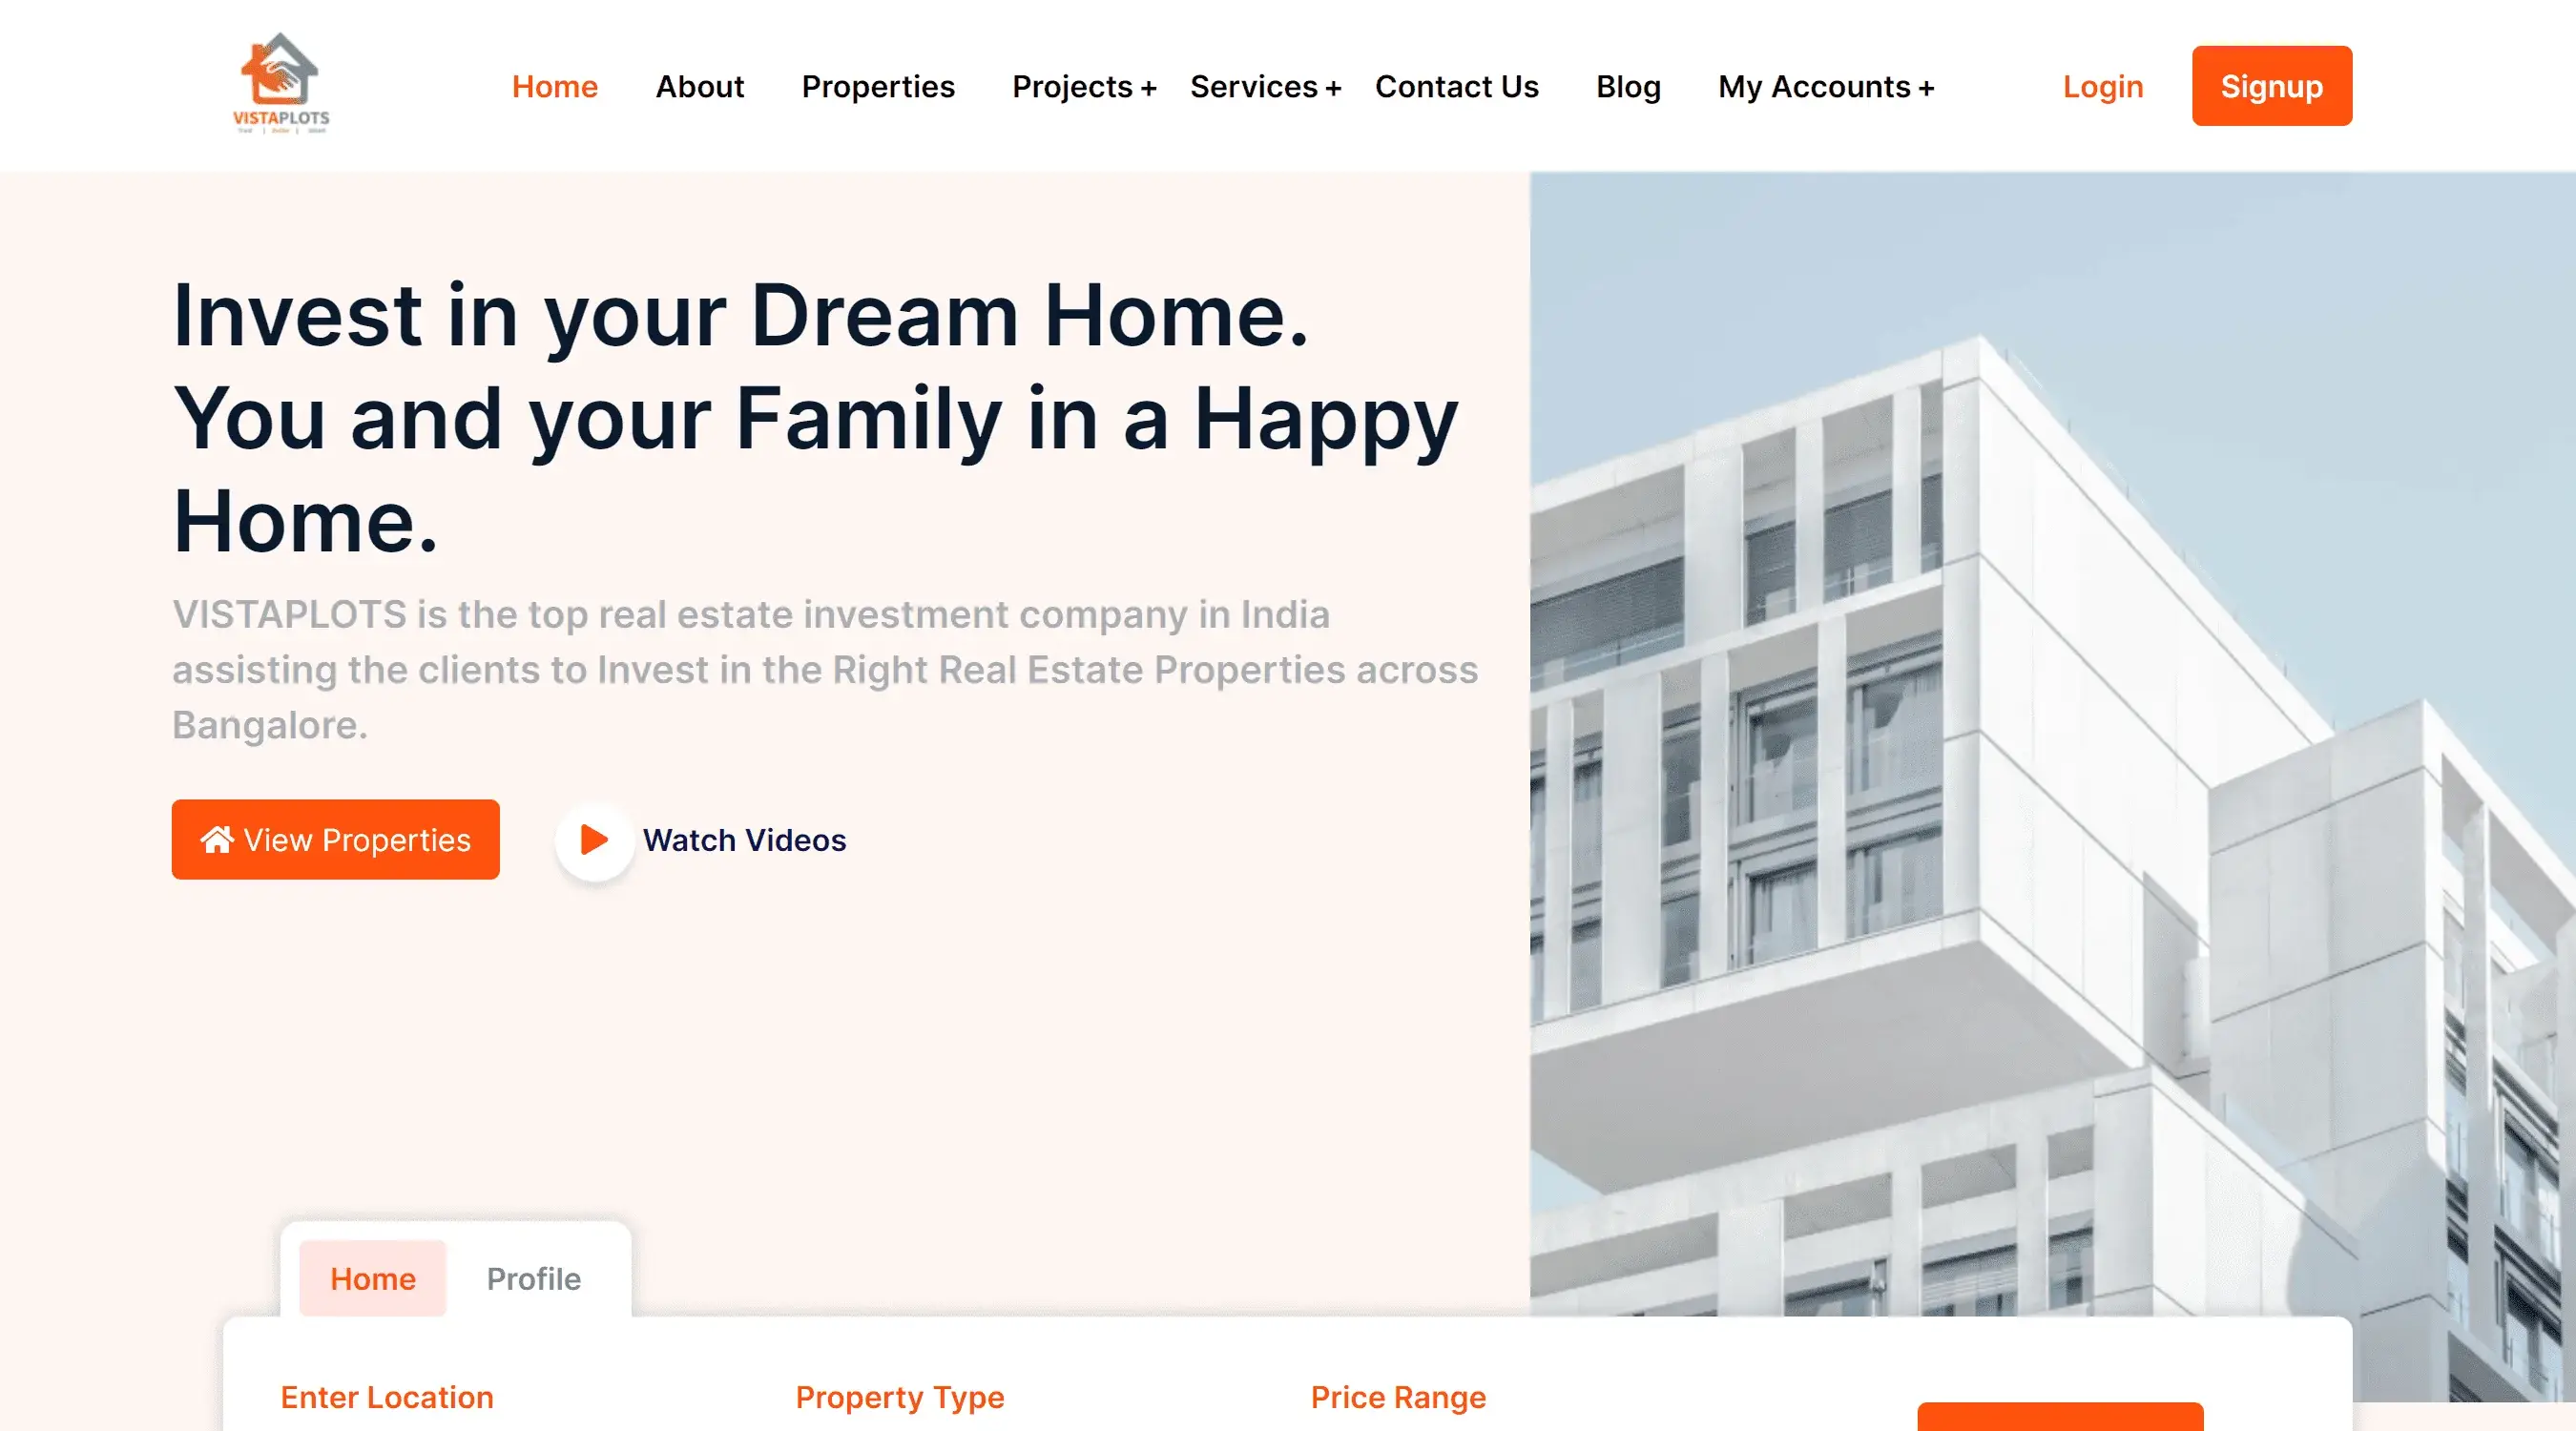 Vistaplots - The top real estate investment company